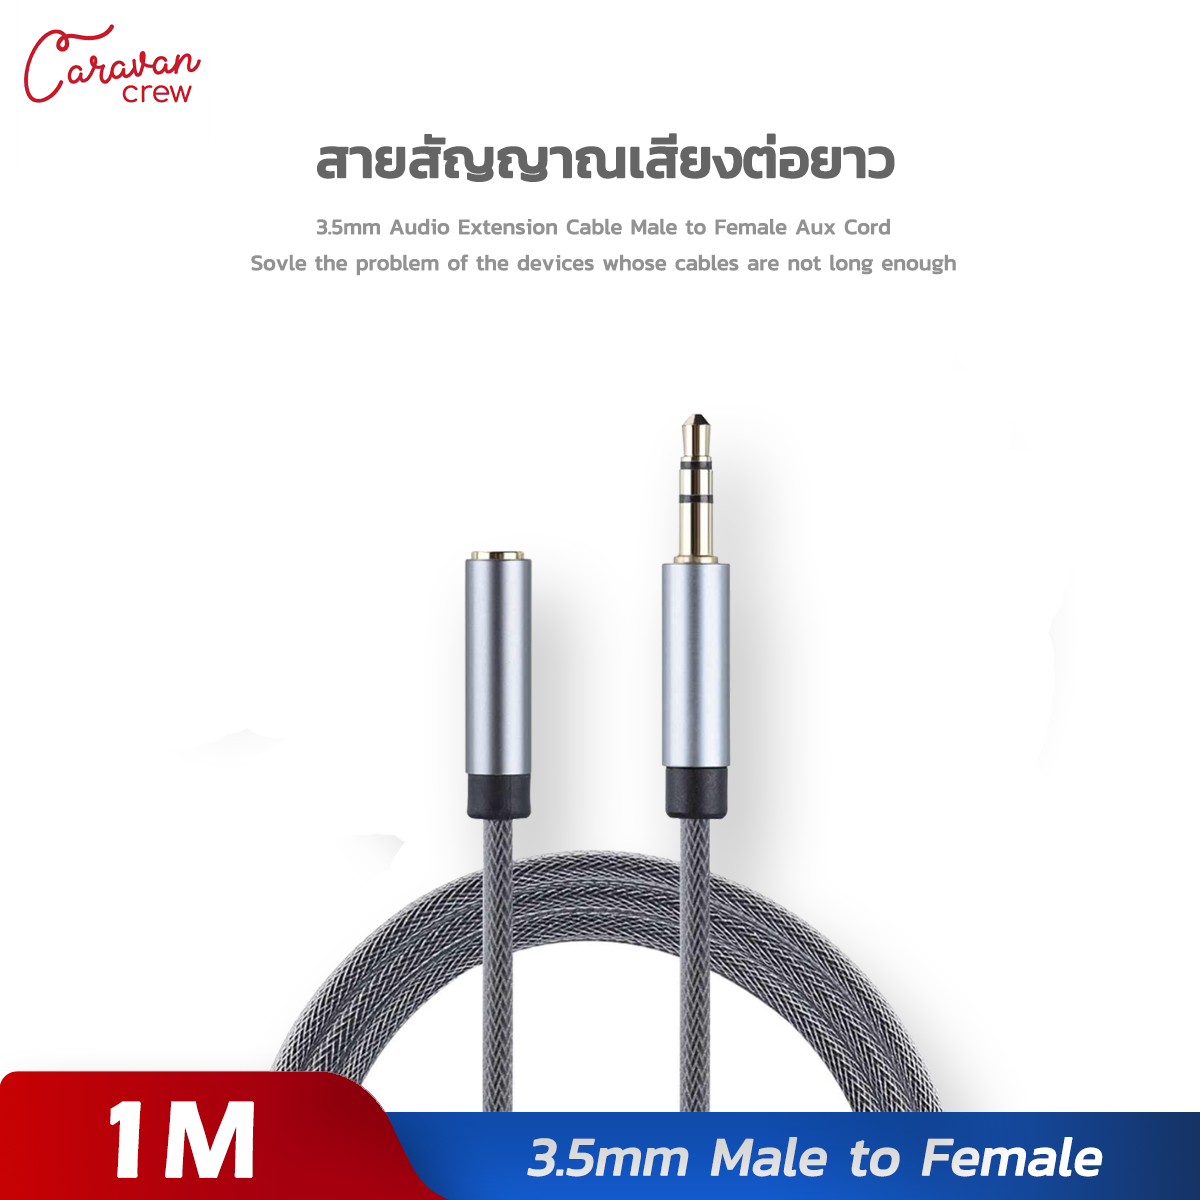 Caravan Crew สายเพิ่มความยาว 3.5mm Male to Female Stereo Audio Cable Woven fishing net for iPad or Smartphones, Tablets, Media Players